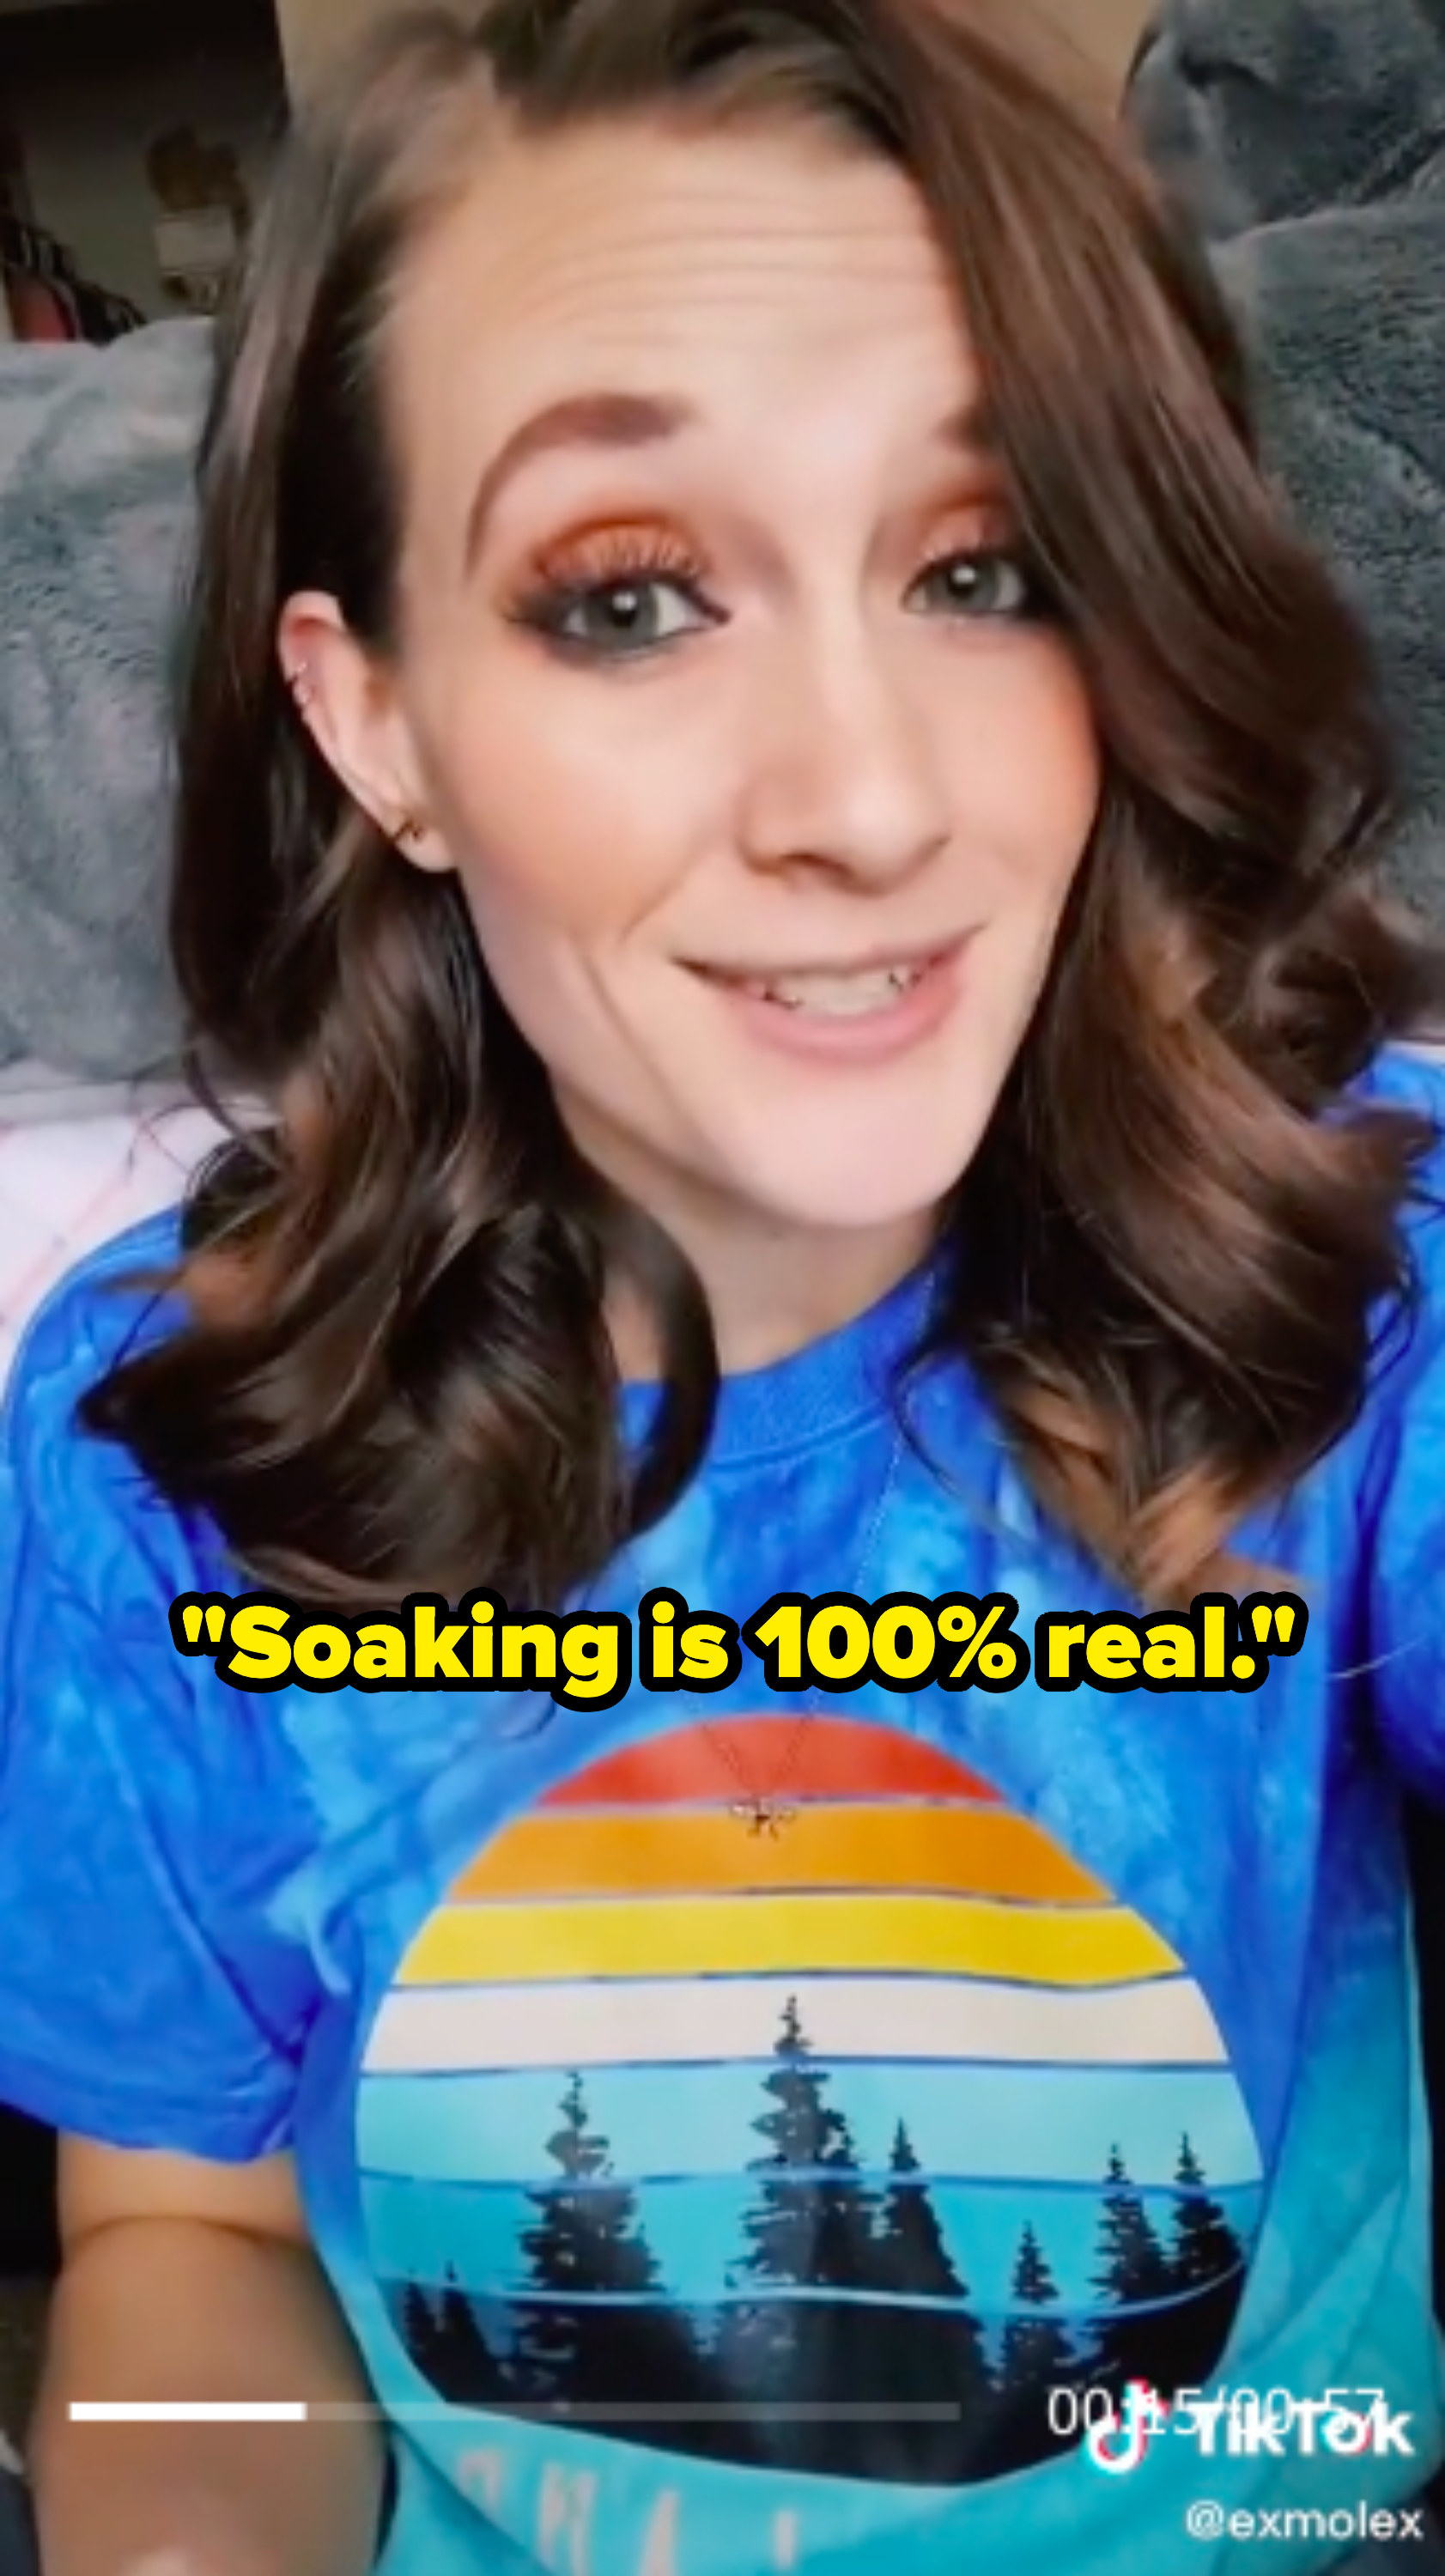 Lexi saying &quot;Soaking is 100% real&quot;